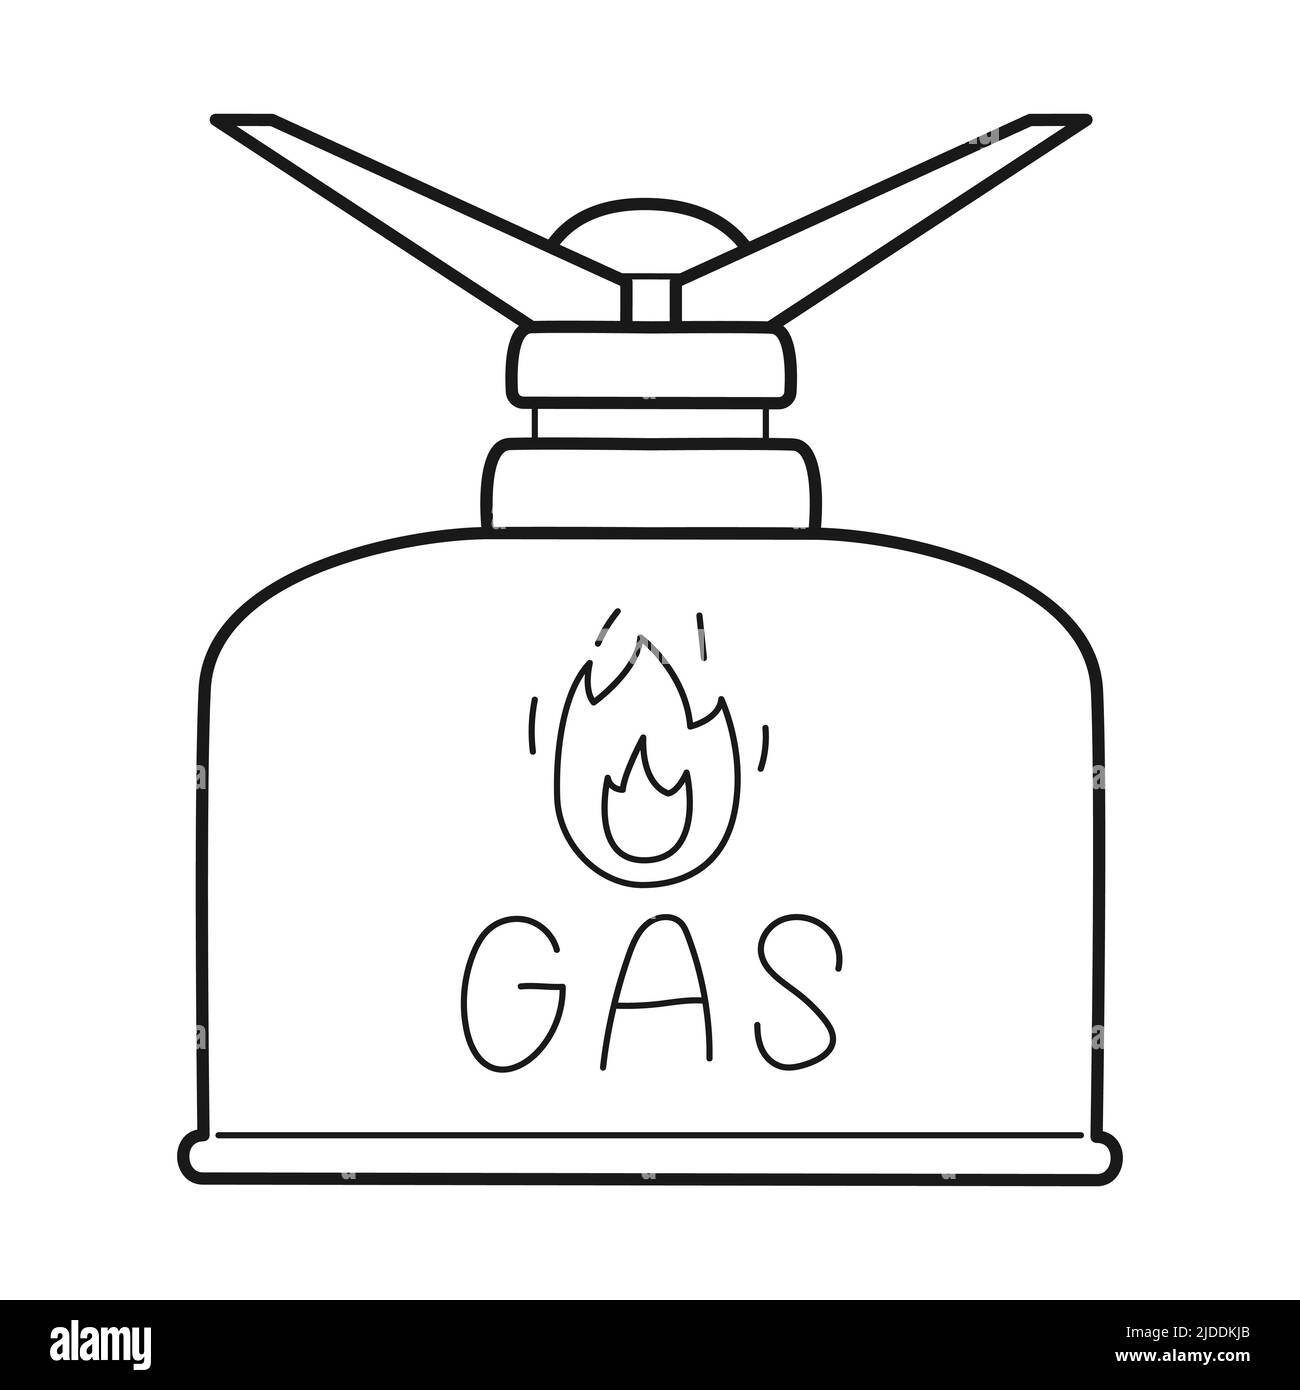 Doodle Gas cylinder and gas burner. Camping Outdoor Stove. Equipment for cooking in hiking, traveling, camping. Tourist inventory. Outline black and w Stock Vector